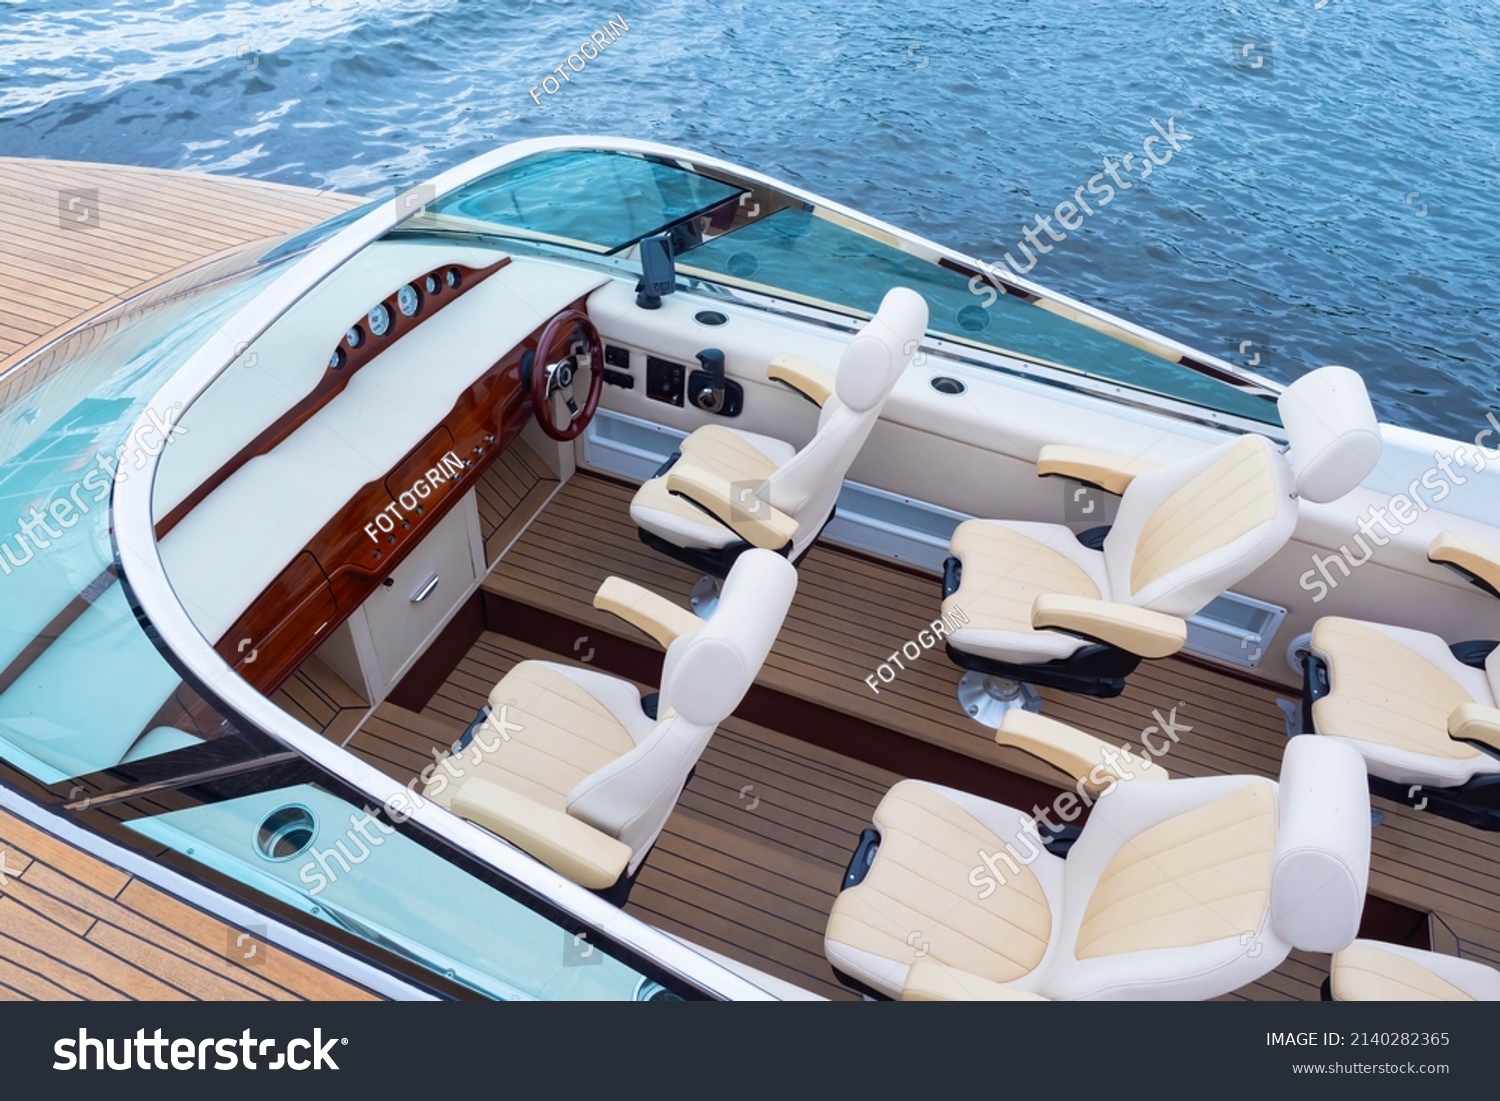 Speedy motor boat. Boat trips. An empty cabin of a motor boat. Leather seats and wooden trim of a luxury yacht. Sale of passenger ships. Recreation on the water. #2140282365